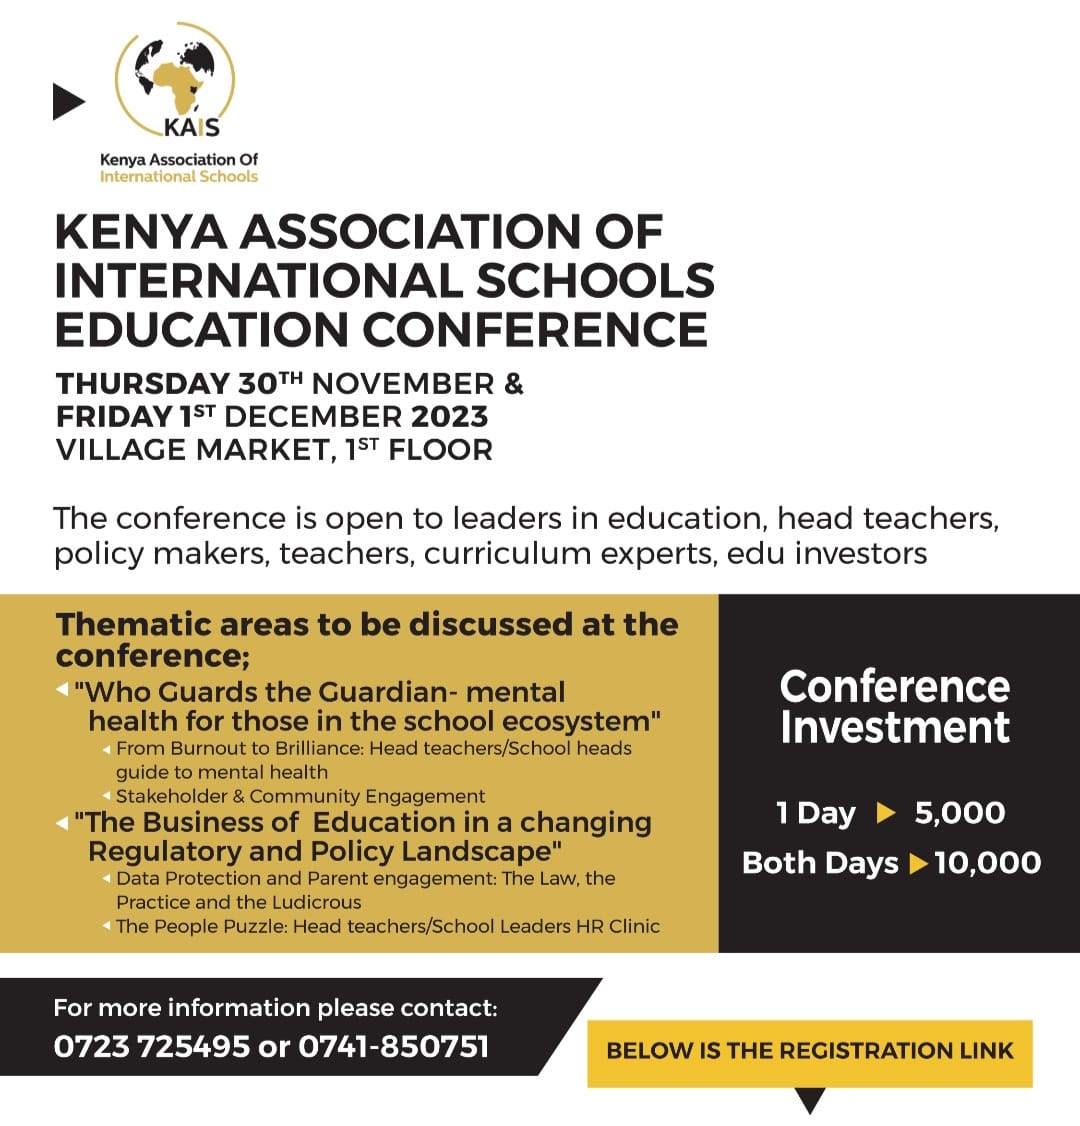 KAIS EDUCATION CONFERENCE